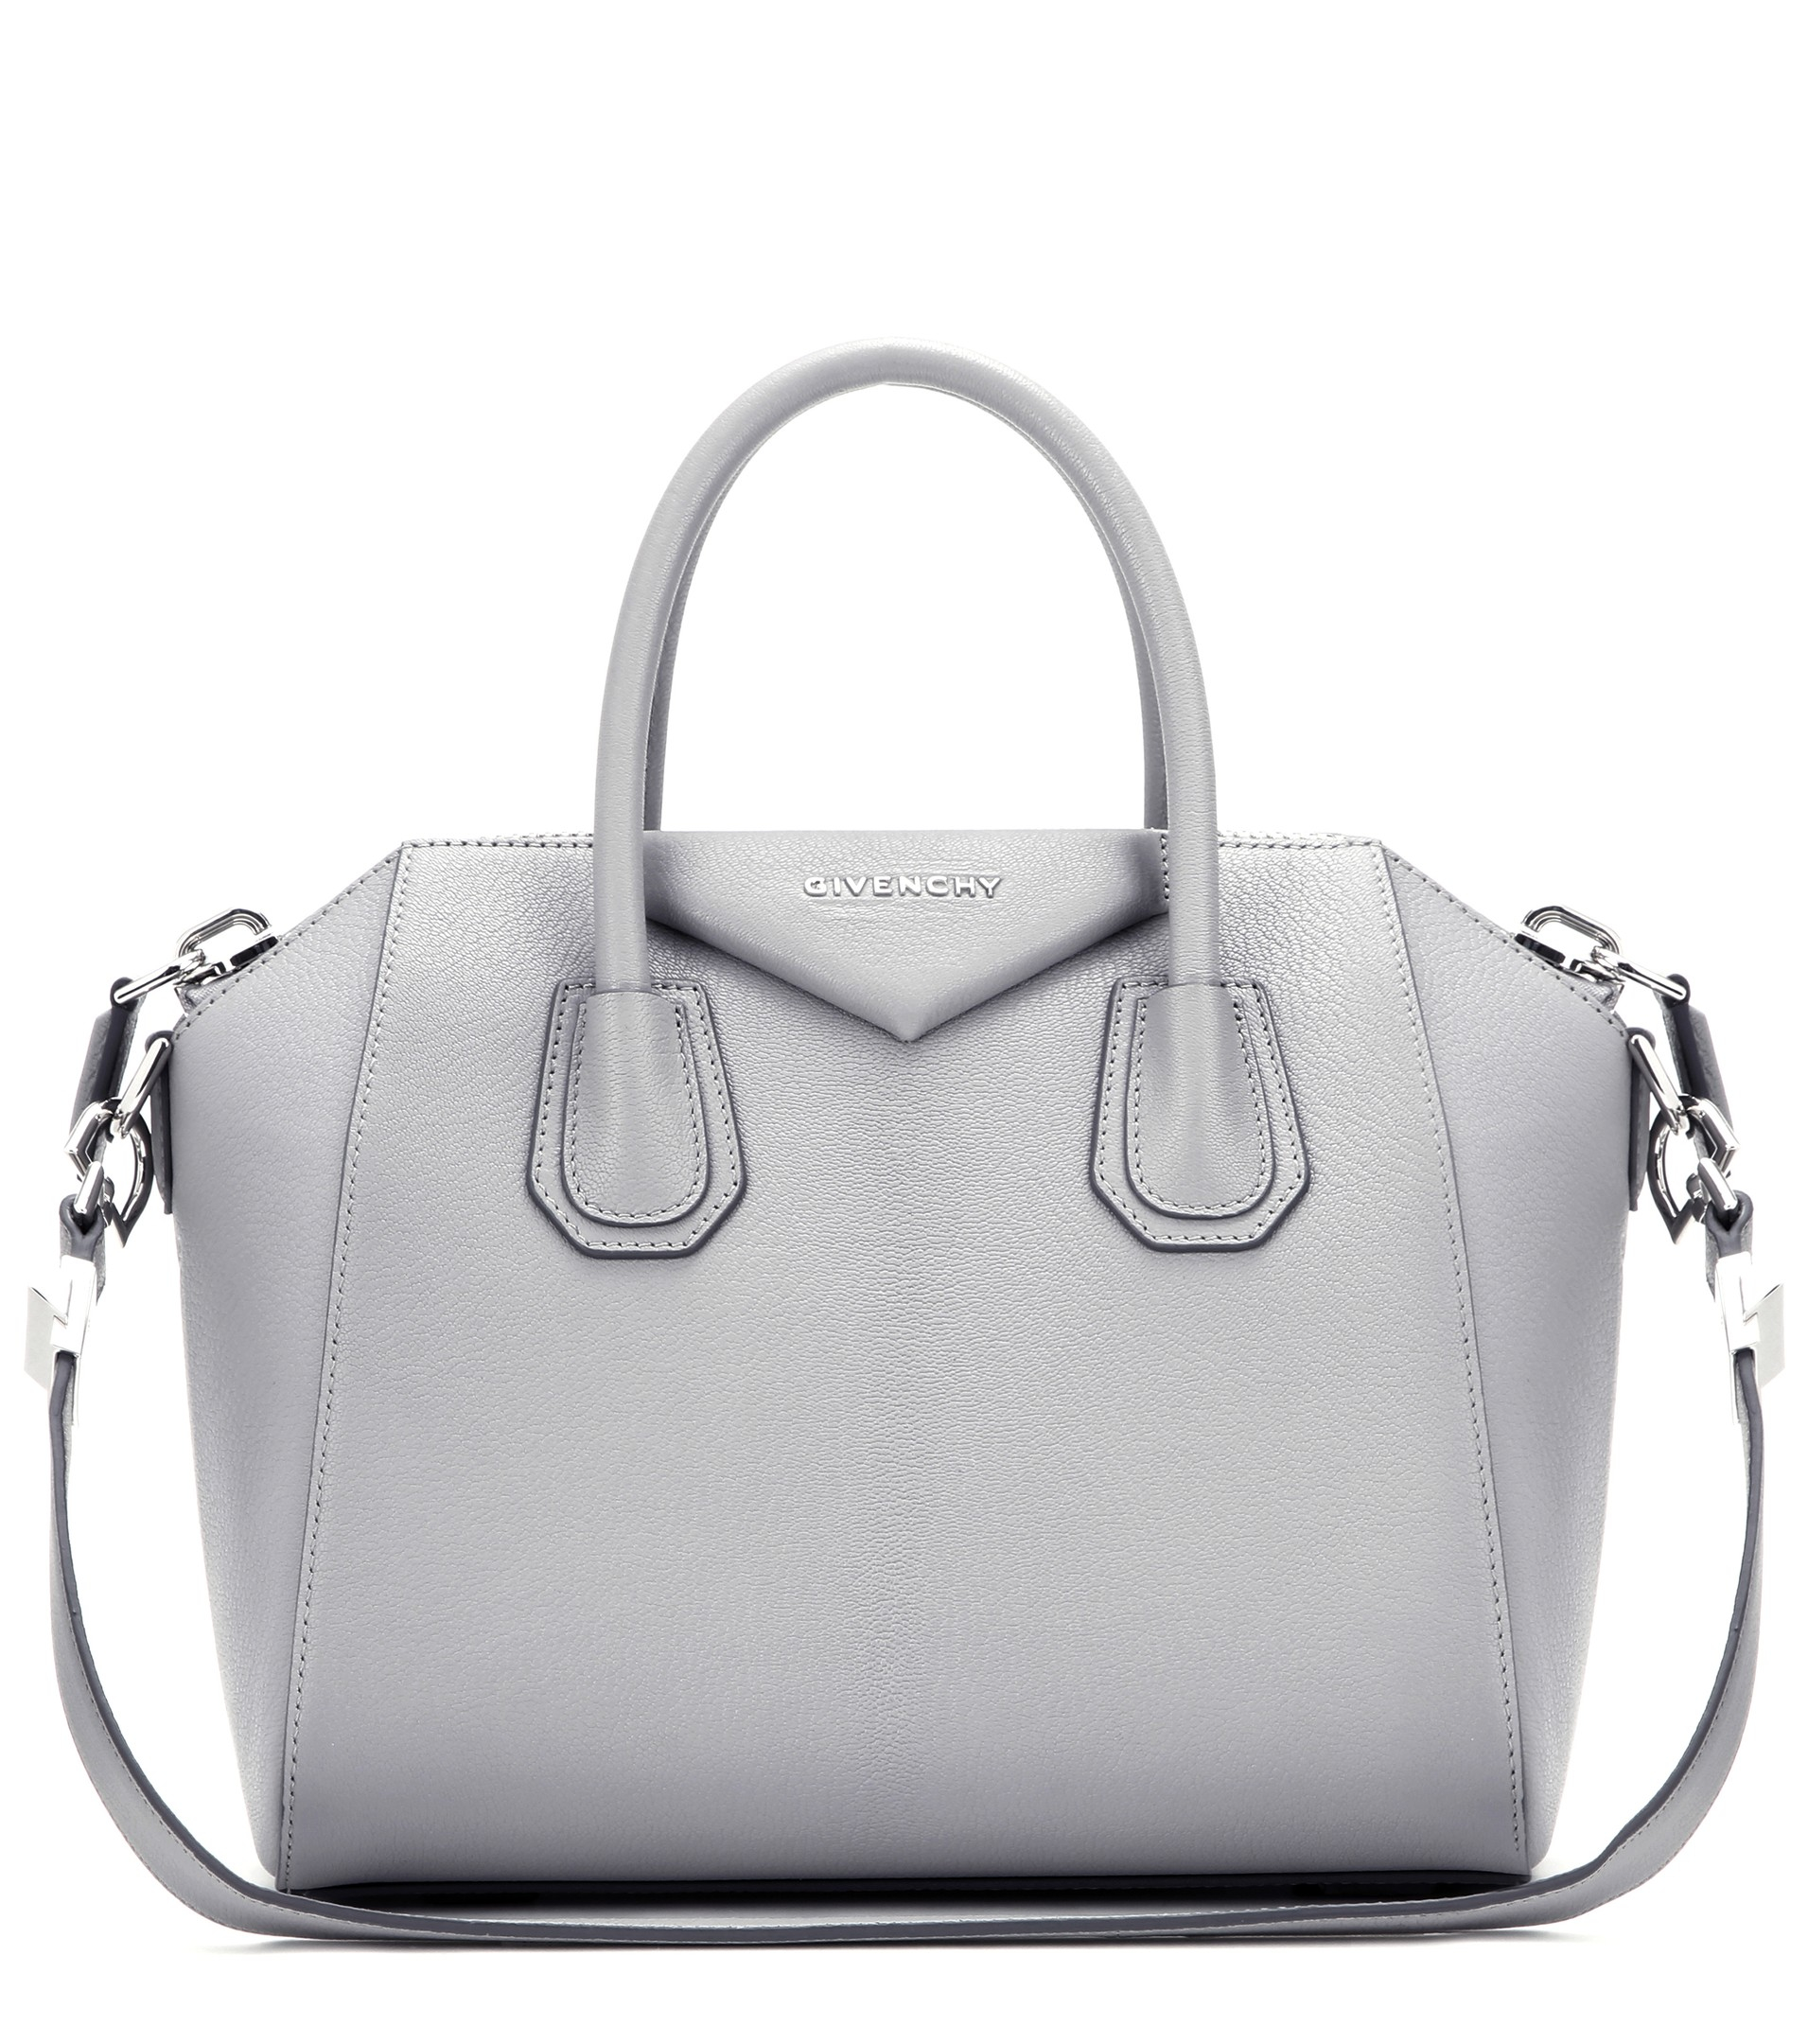 Givenchy Antigona Small Leather Tote in Gray | Lyst